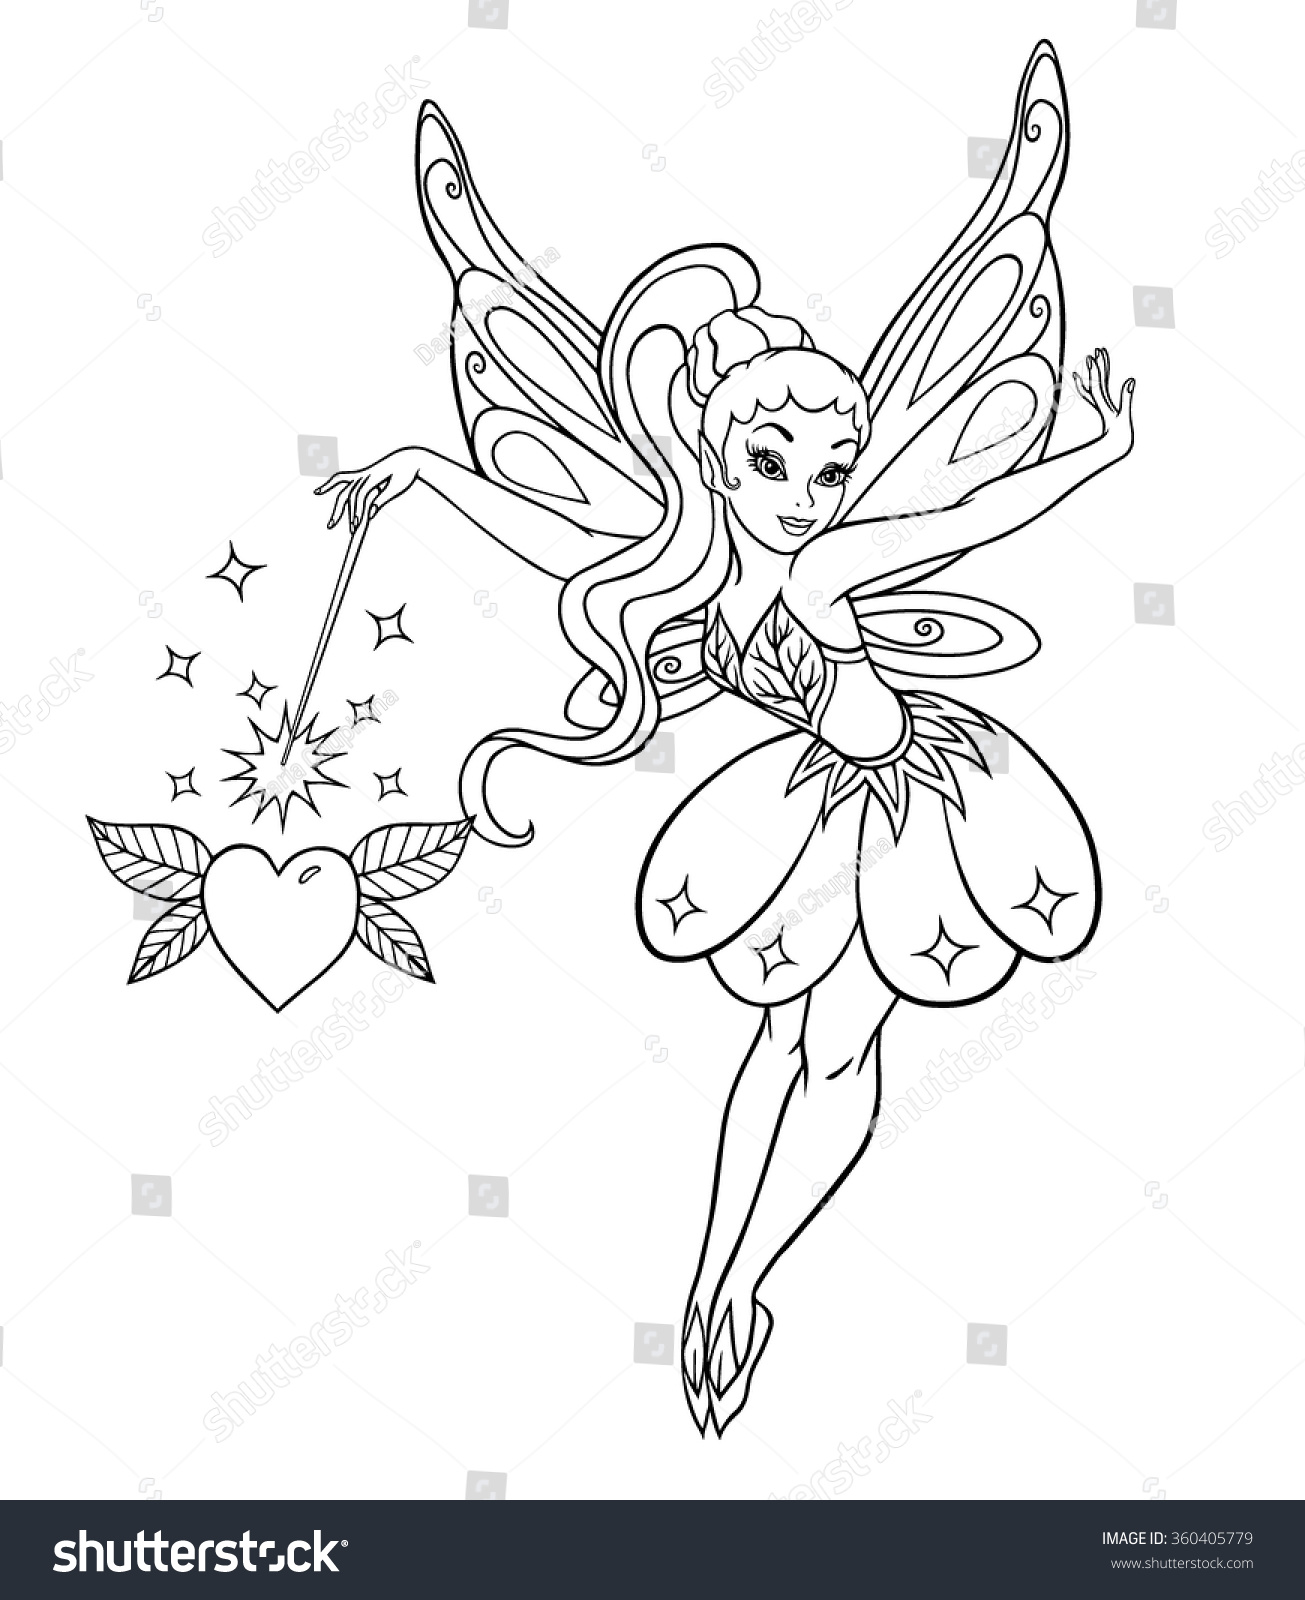 Download Outlined Beautiful Fairy Sparkles Magic Wand Stock Vector ...